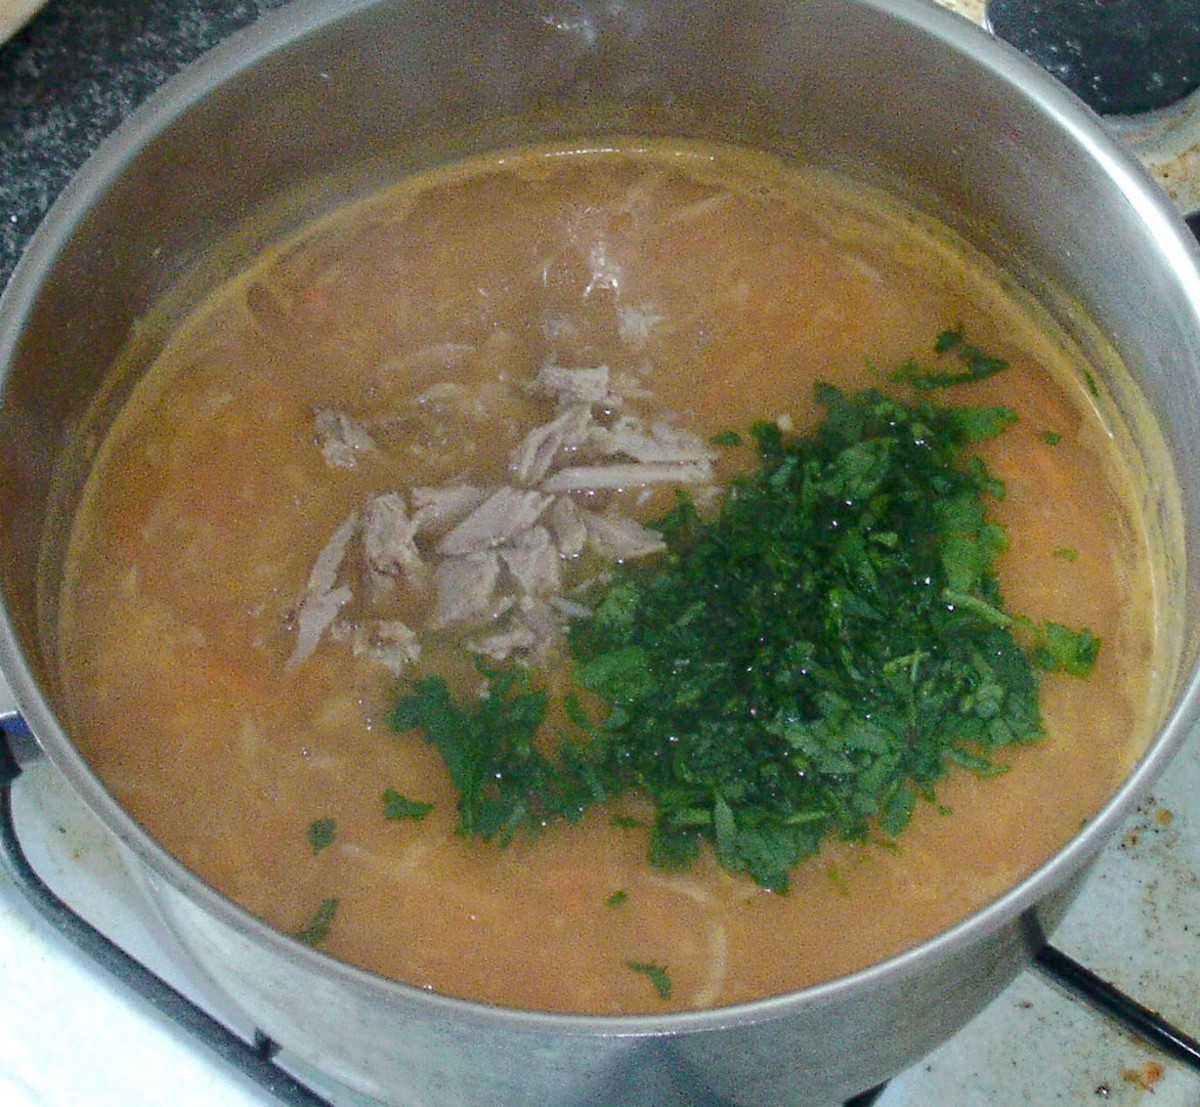 Pheasant meat and parsley are added to soup